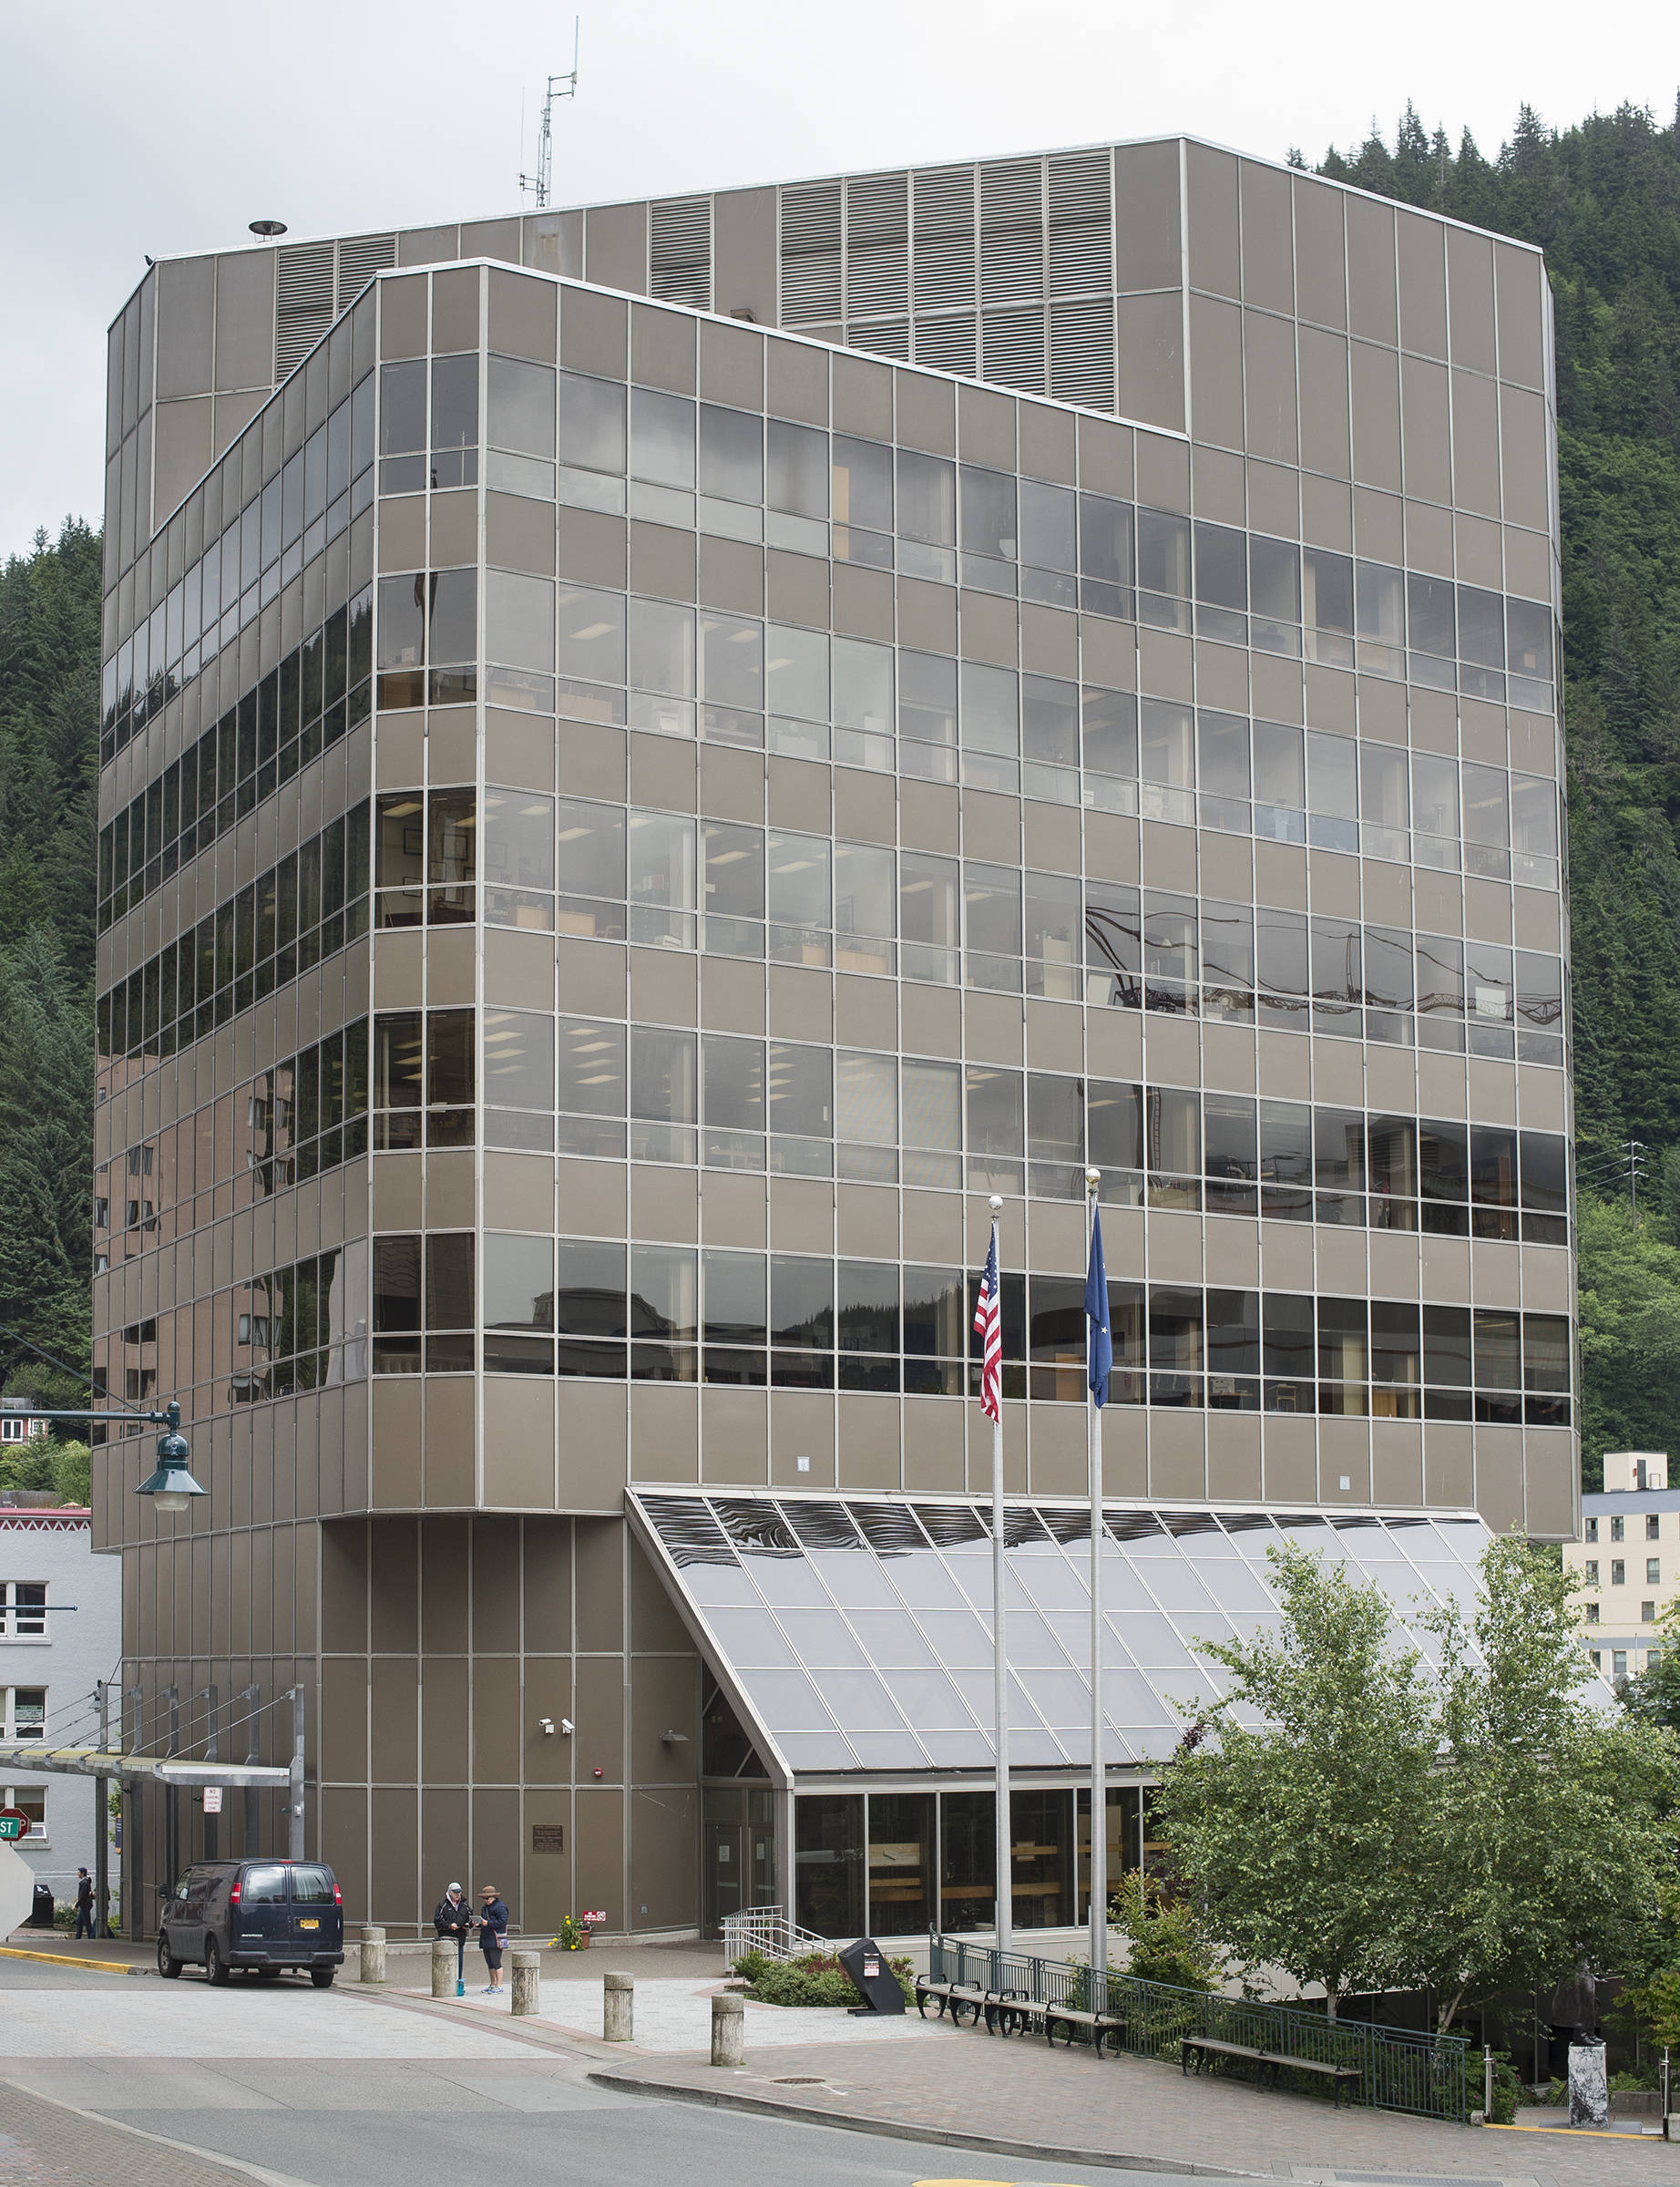 The Dimond Courthouse at the corner of Main and 4th Streets in Juneau on Wednesday, July 19, 2017. (Michael Penn | Juneau Empire File)